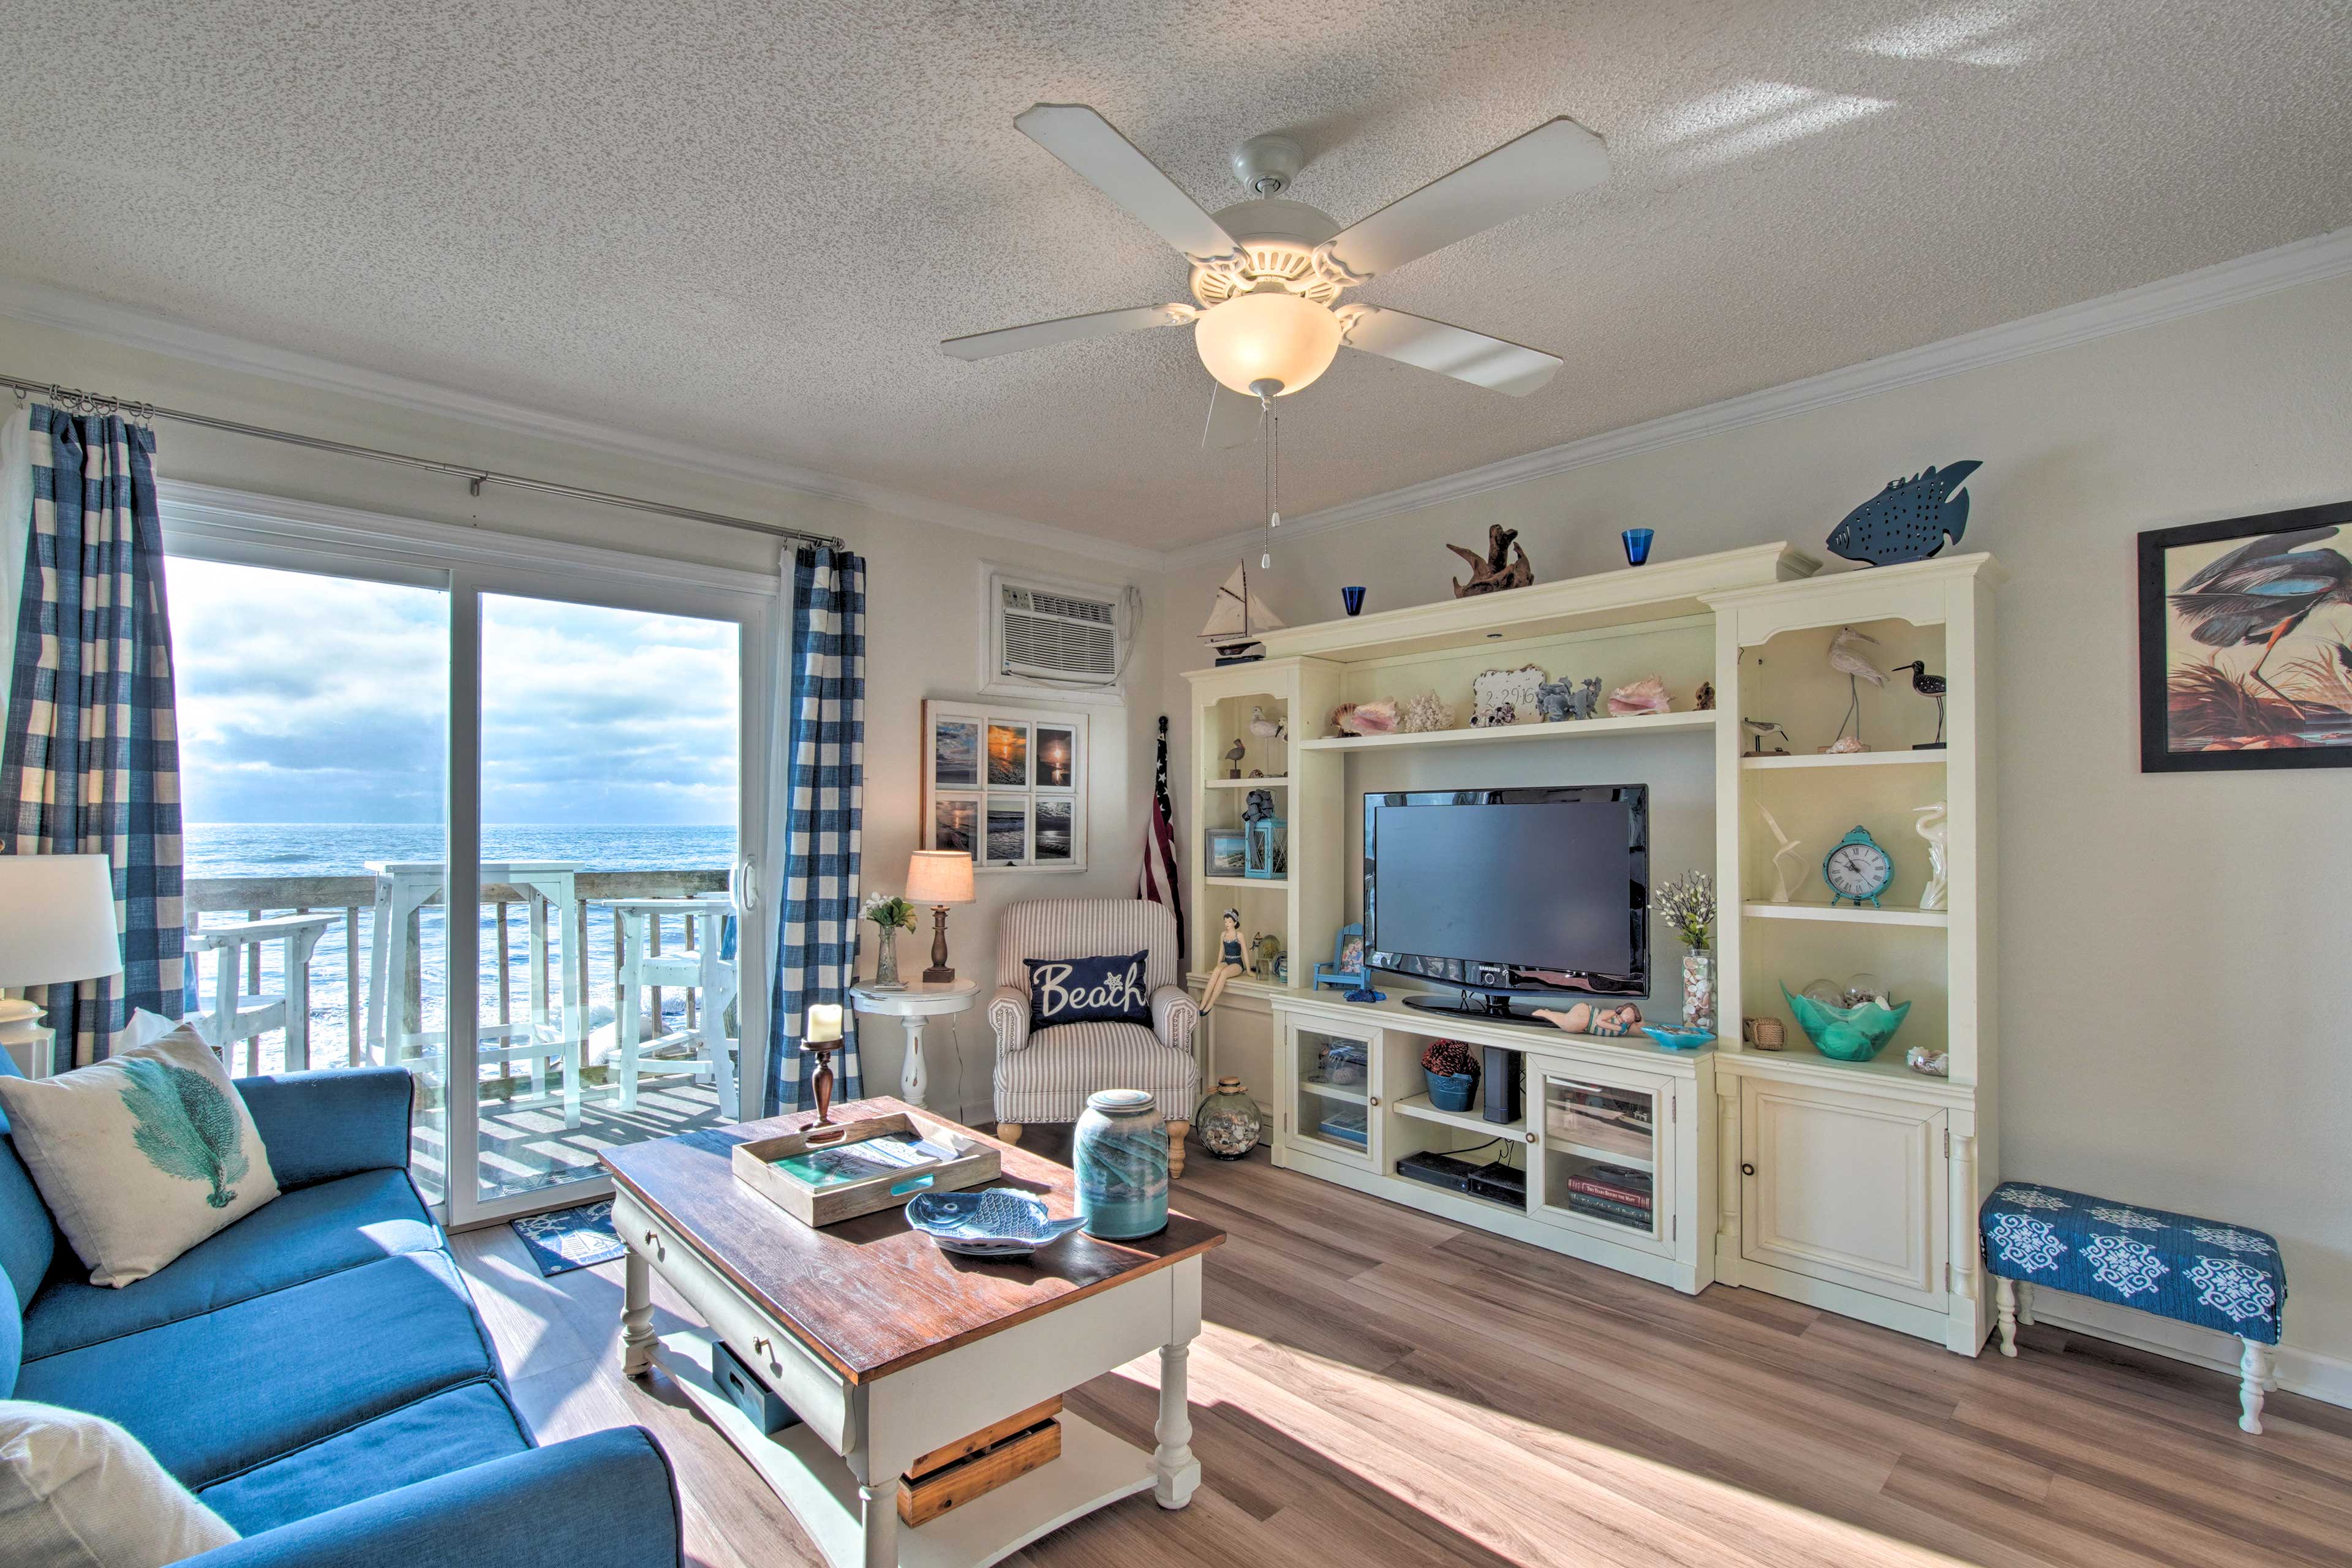 Property Image 1 - NEW! North Topsail Beach Escape with Ocean Views!